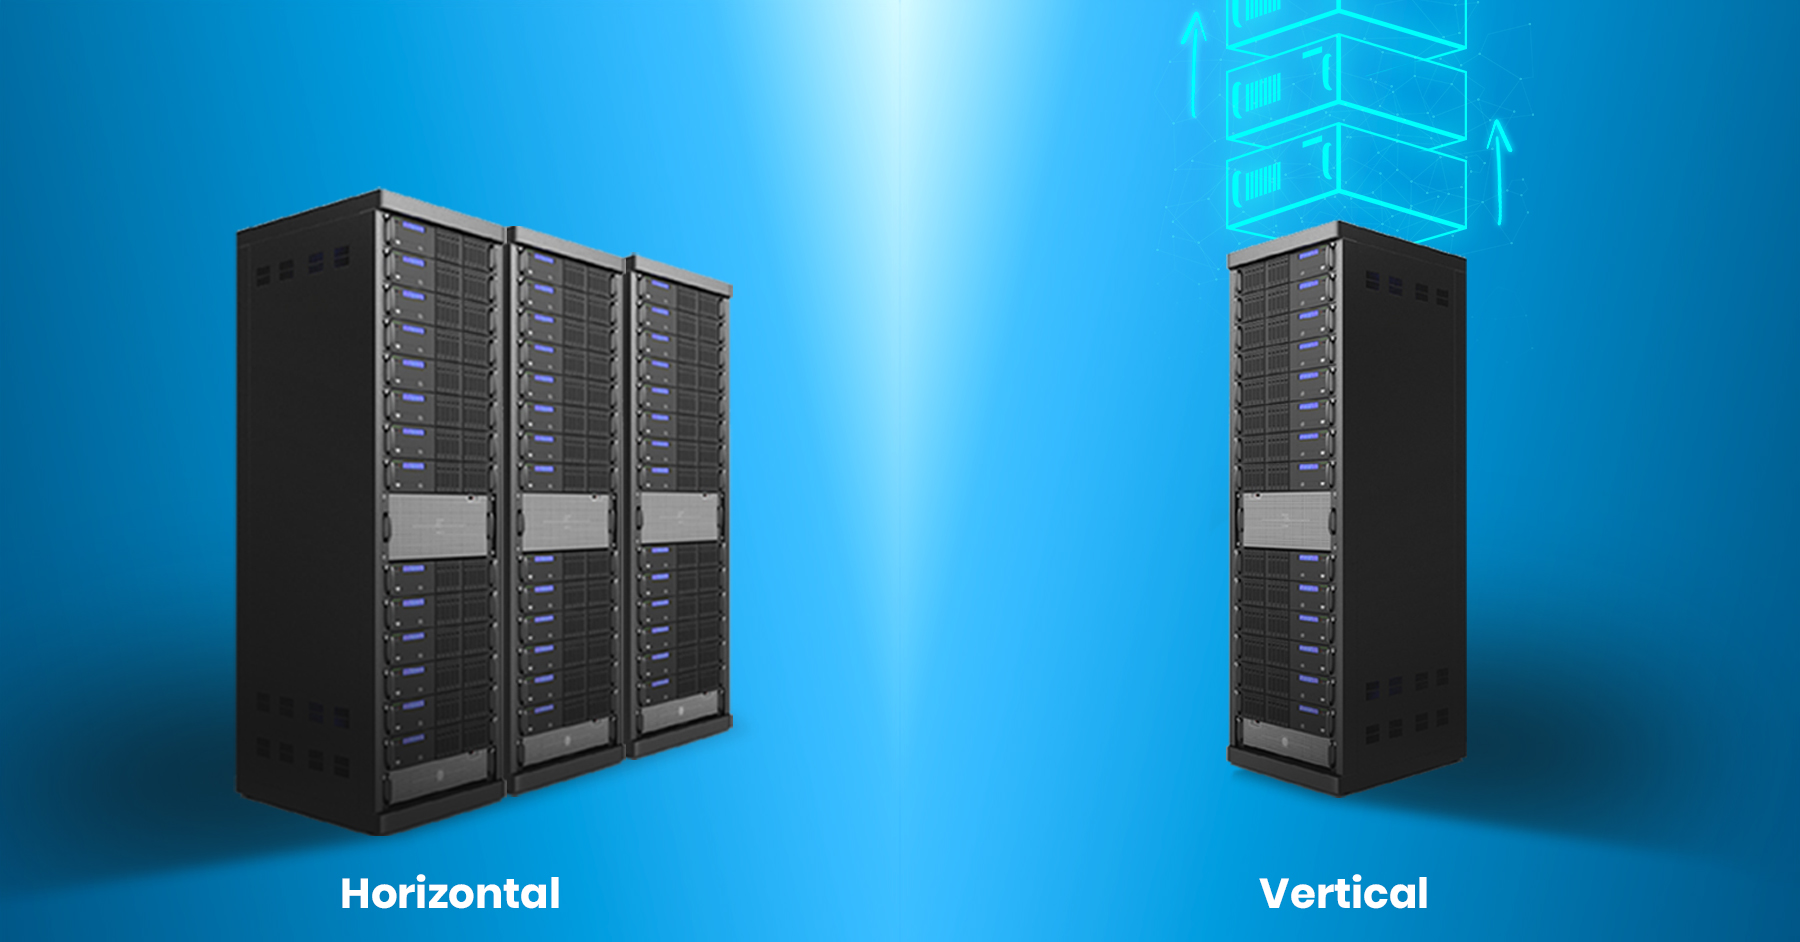 The image shows two servers, one with horizontal scaling and the other with vertical scaling.